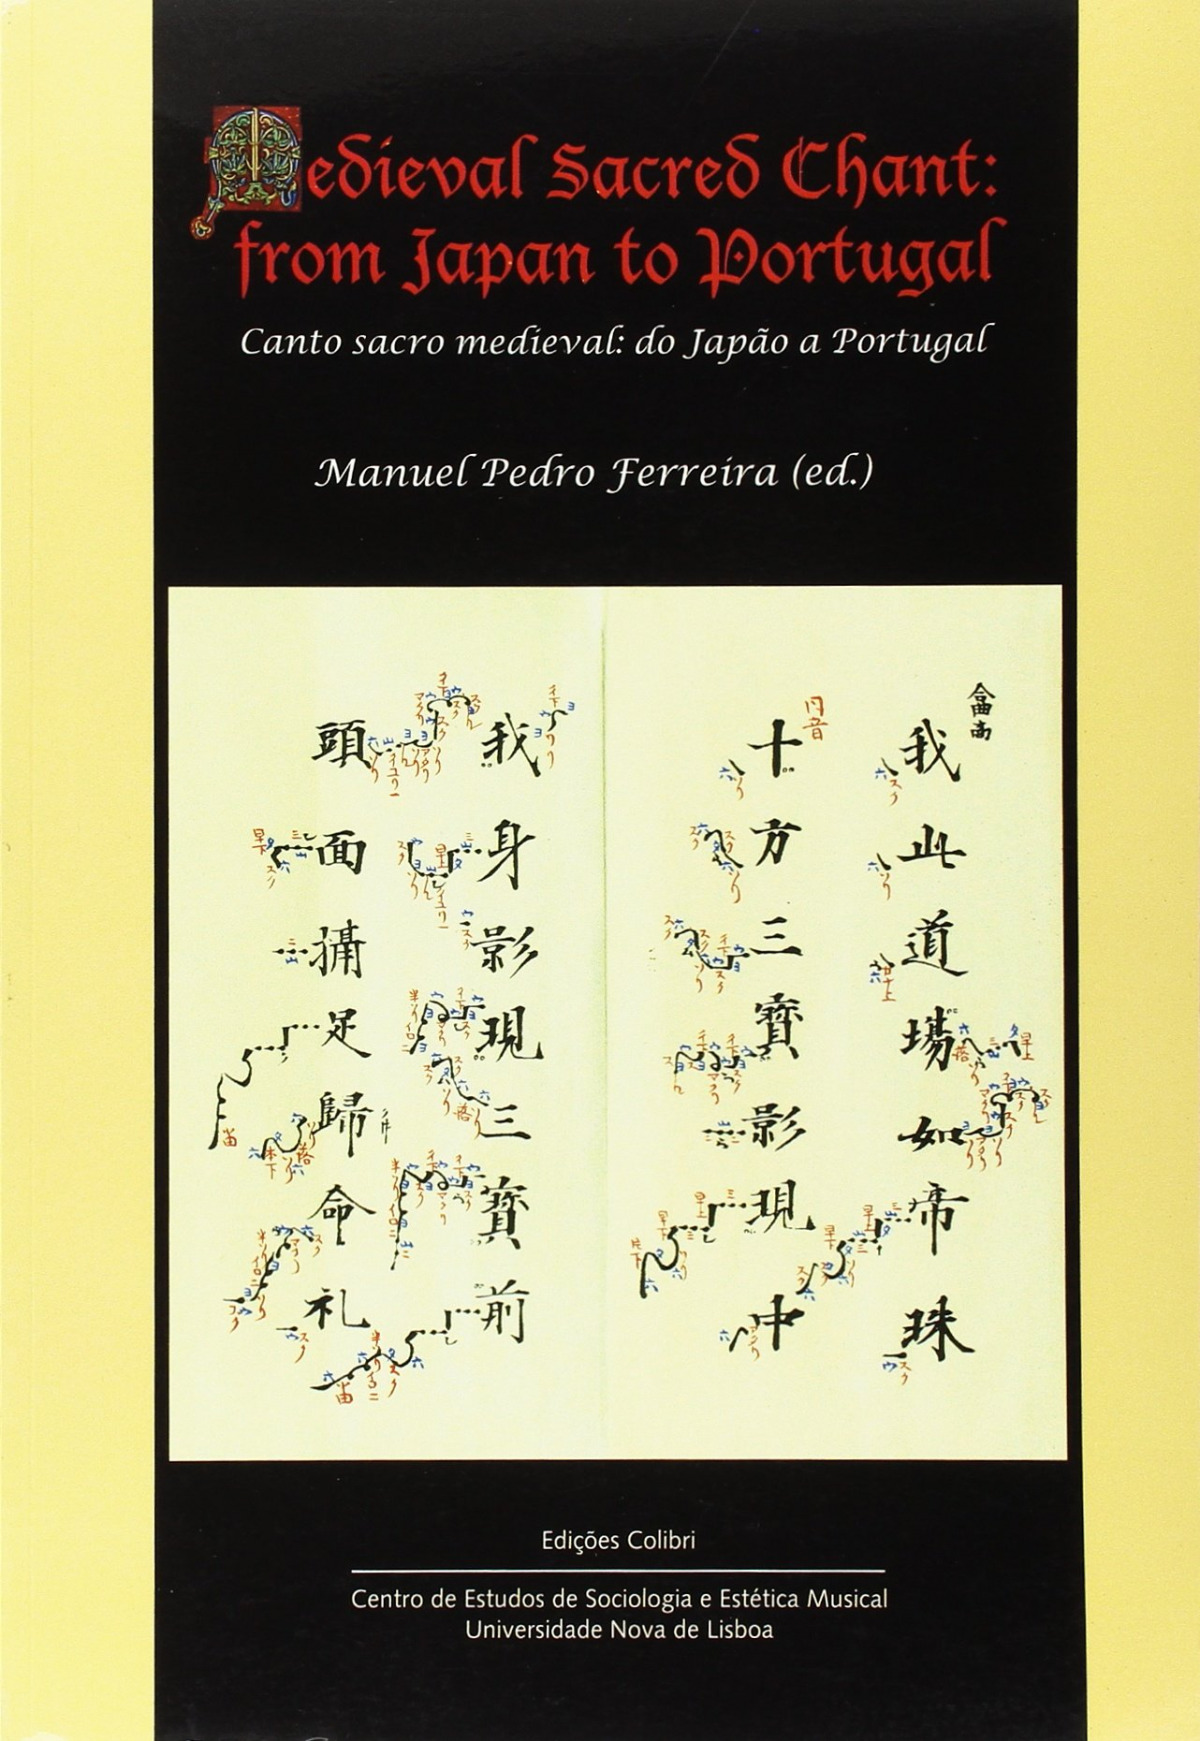 Medieval Sacred Chant: from Japan to Portugal - Canto sacro medieval: - Vv.Aa.